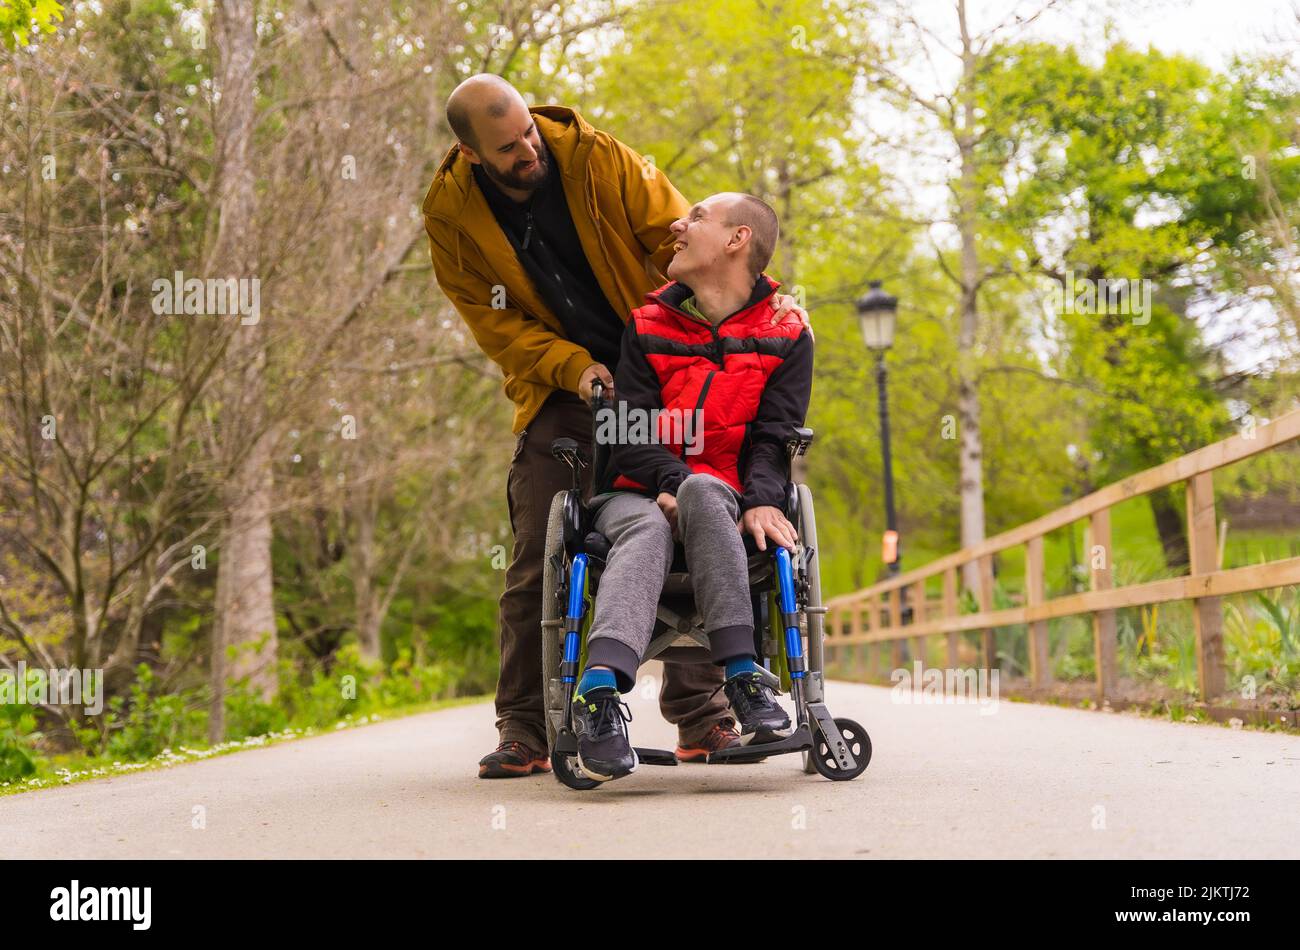 Paralyzed young man in the wheelchair being pushed by a friend in a public city park, strolling along a path having fun and smiling Stock Photo